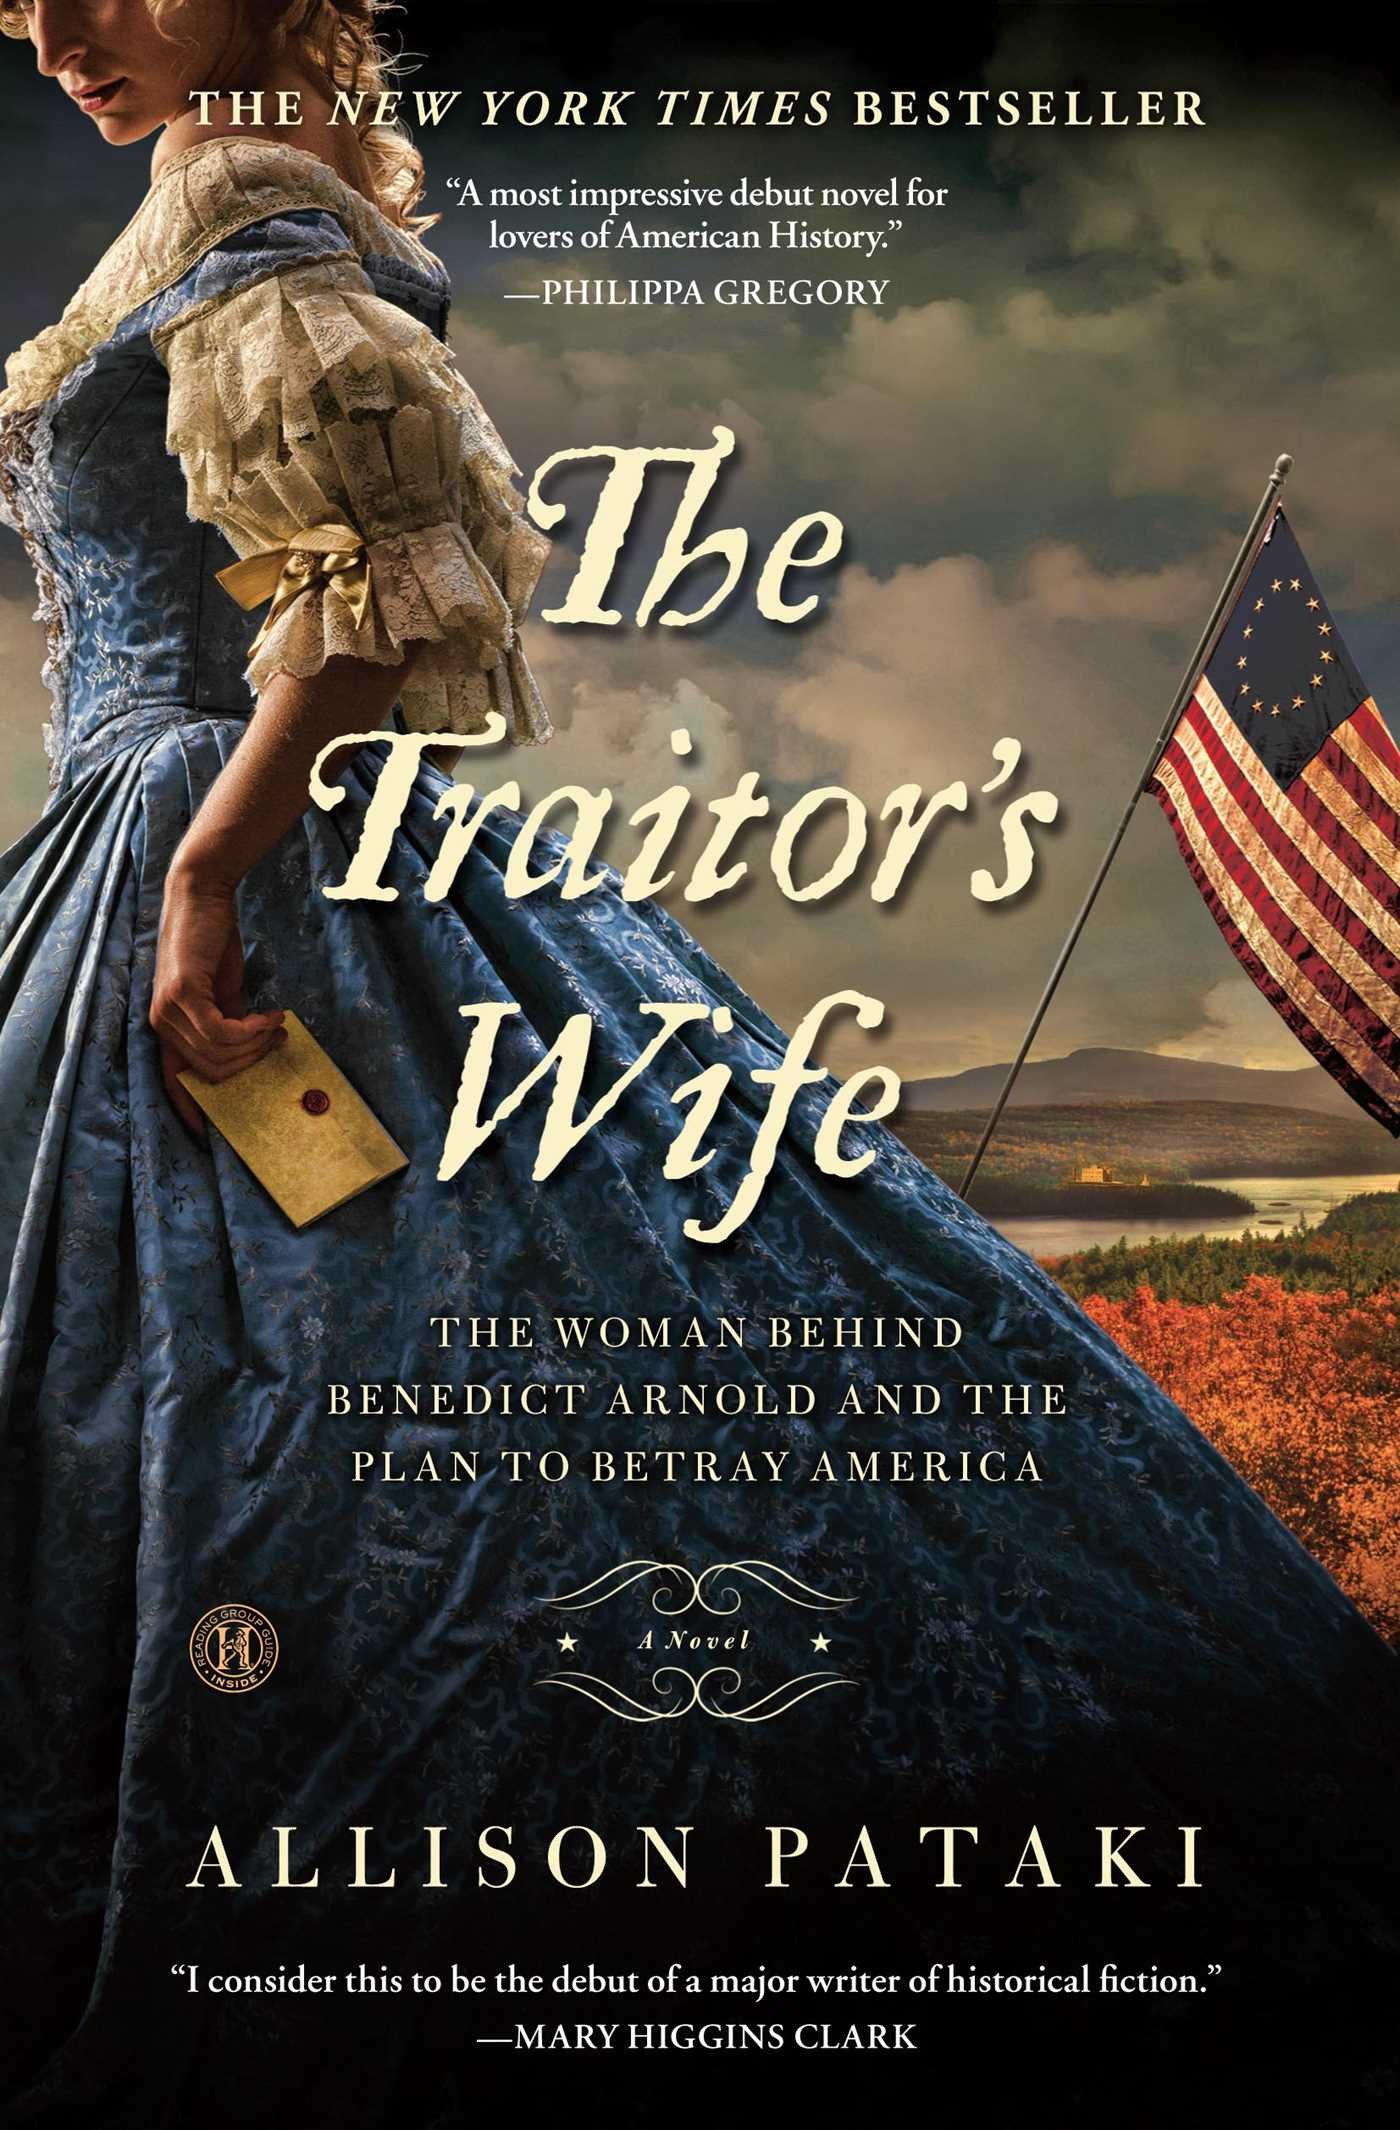 Image for "The Traitor's Wife"